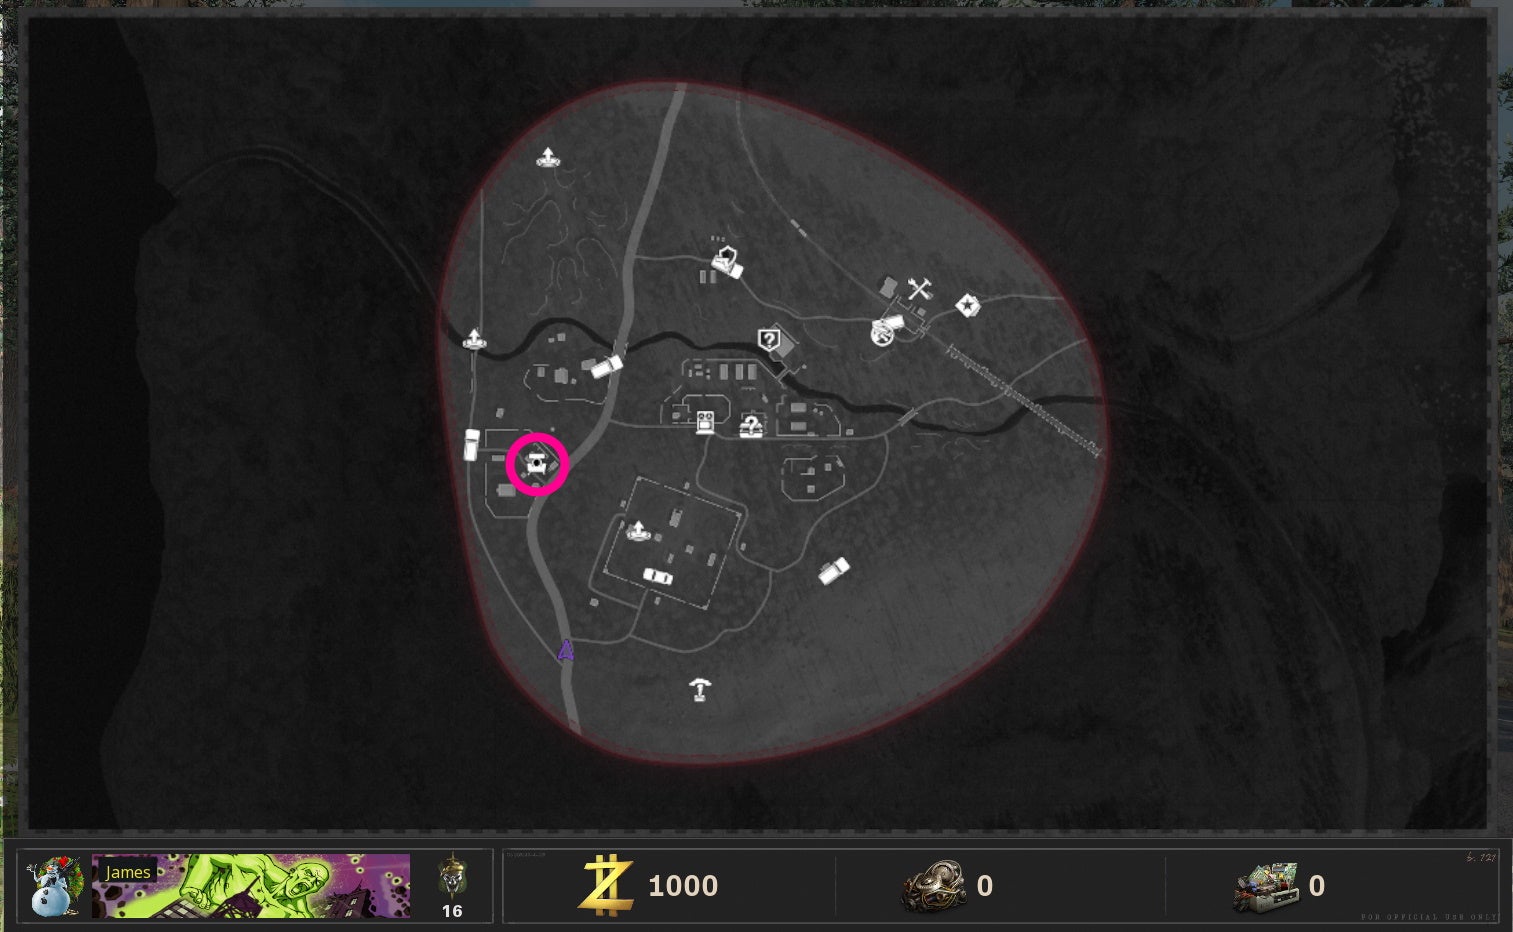 The Pack-A-Punch machine is circled on the Outbreak map